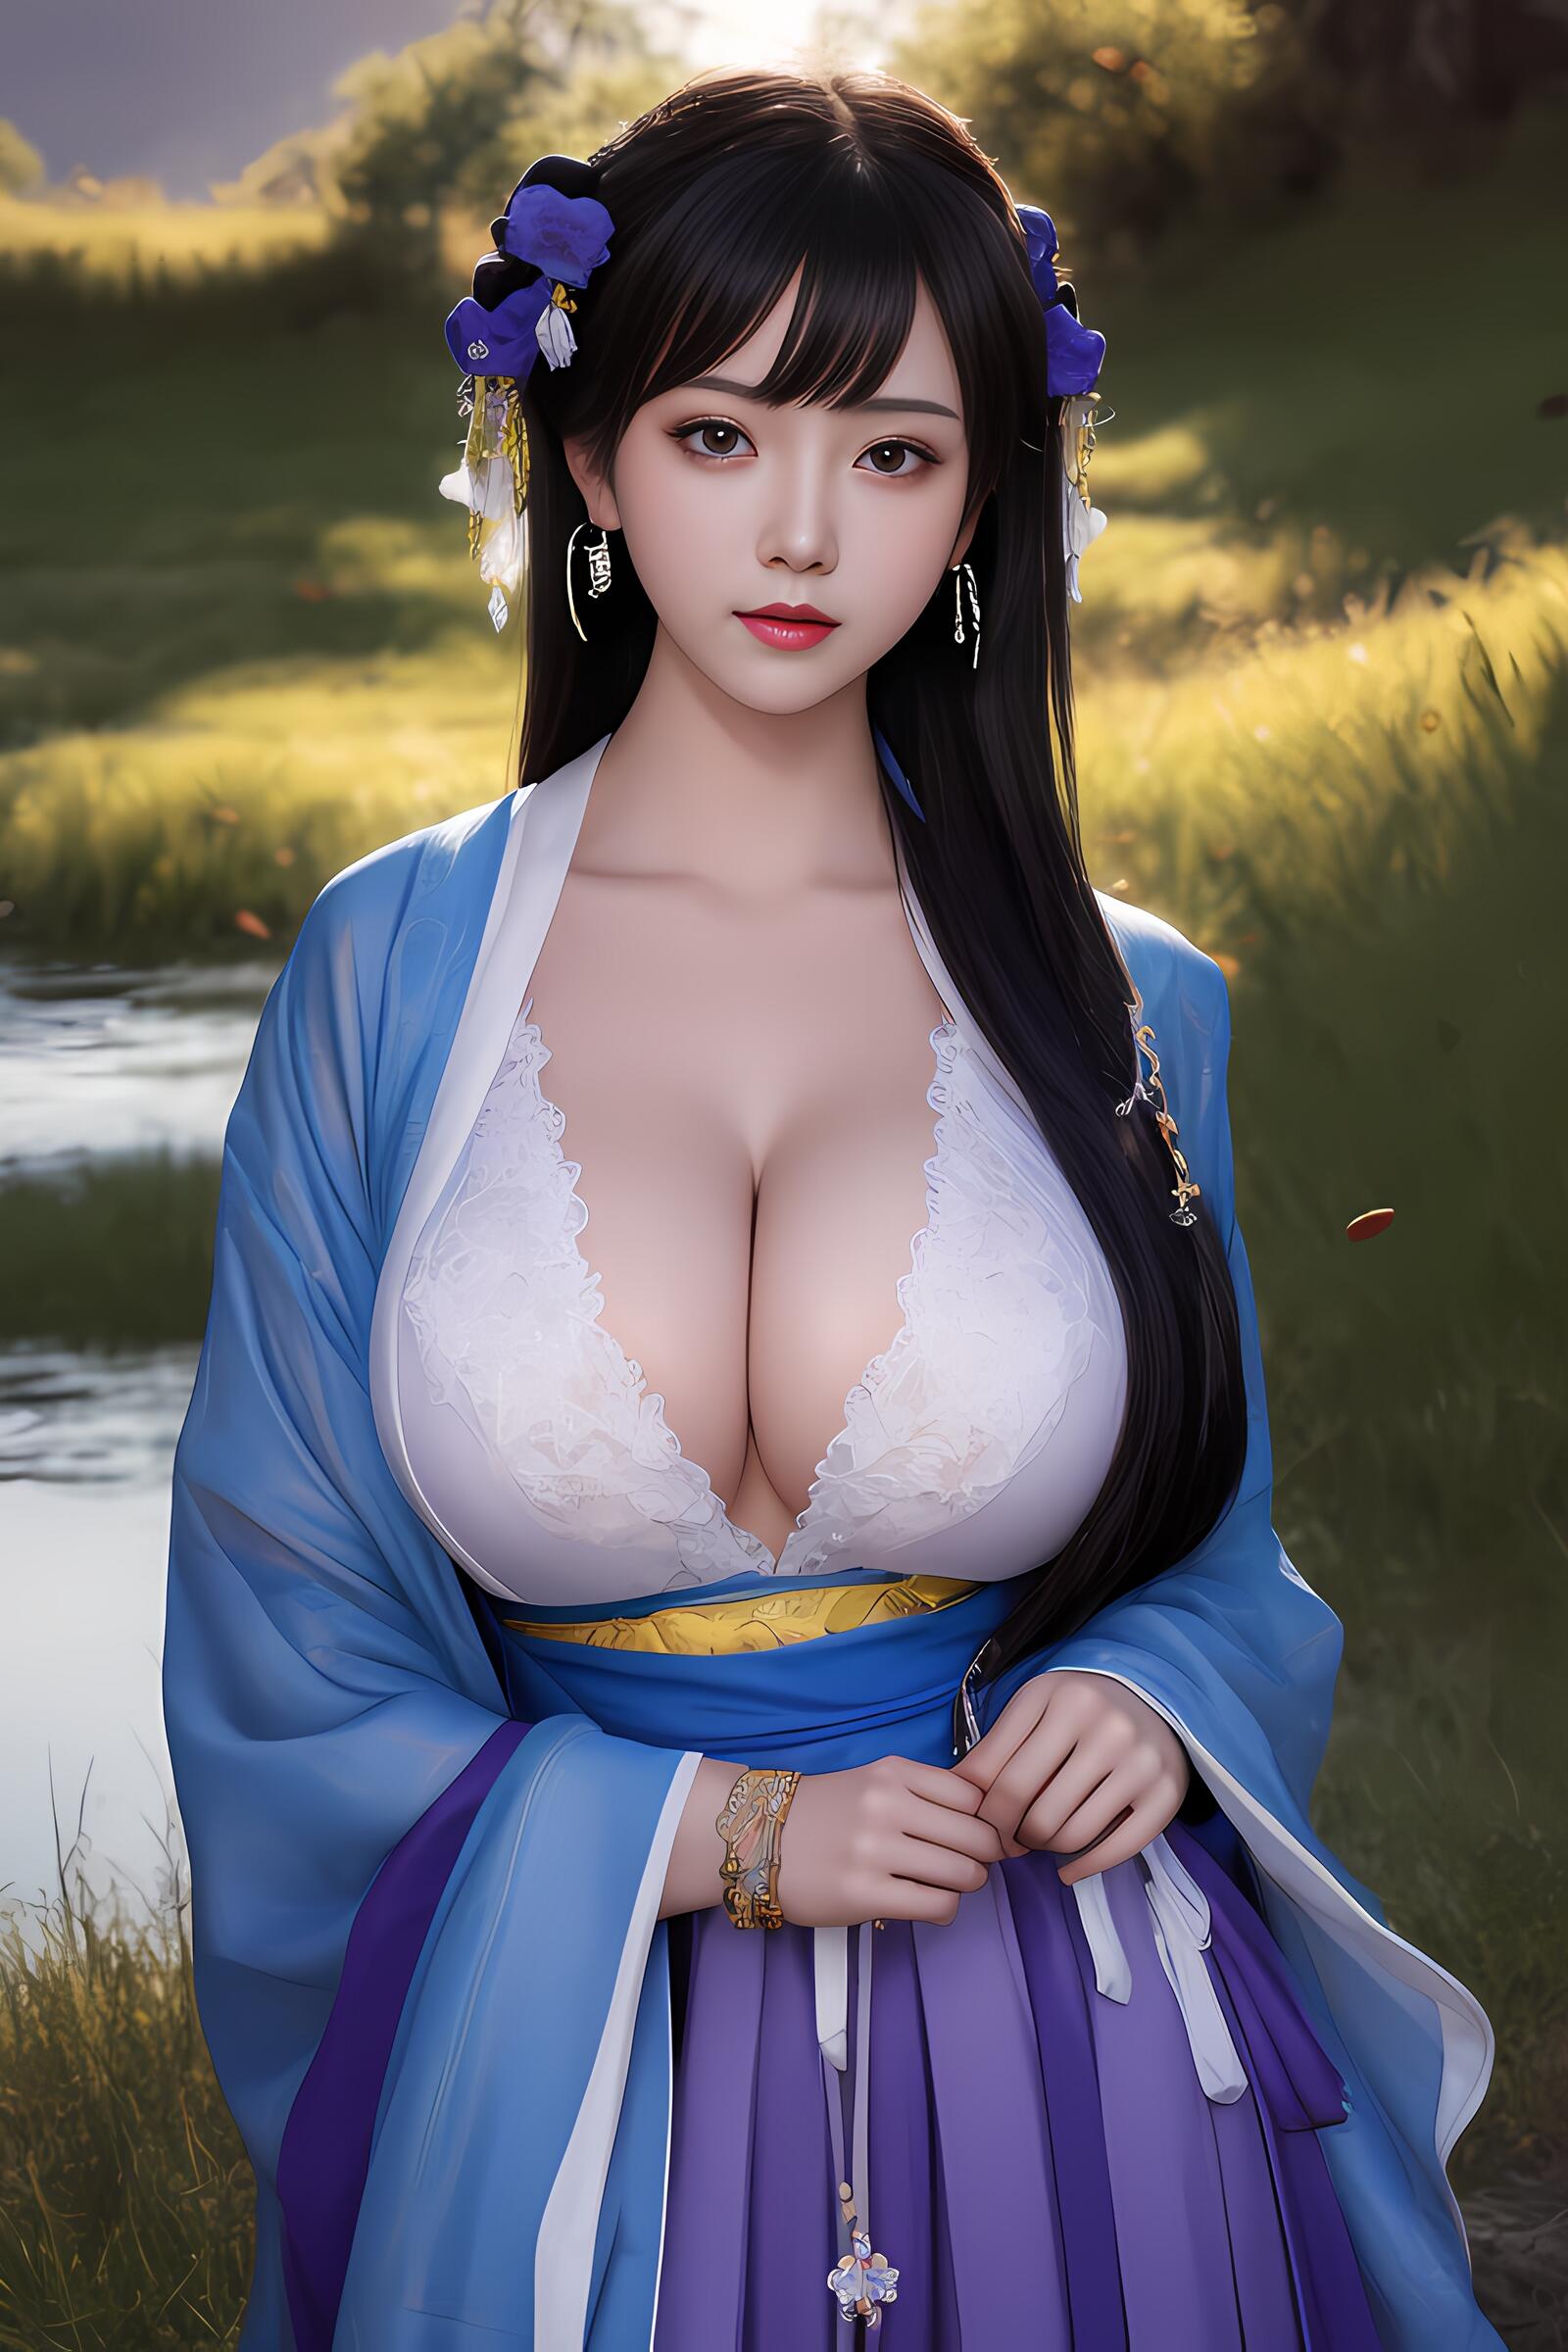 Free photo Busty Asian woman with black hair